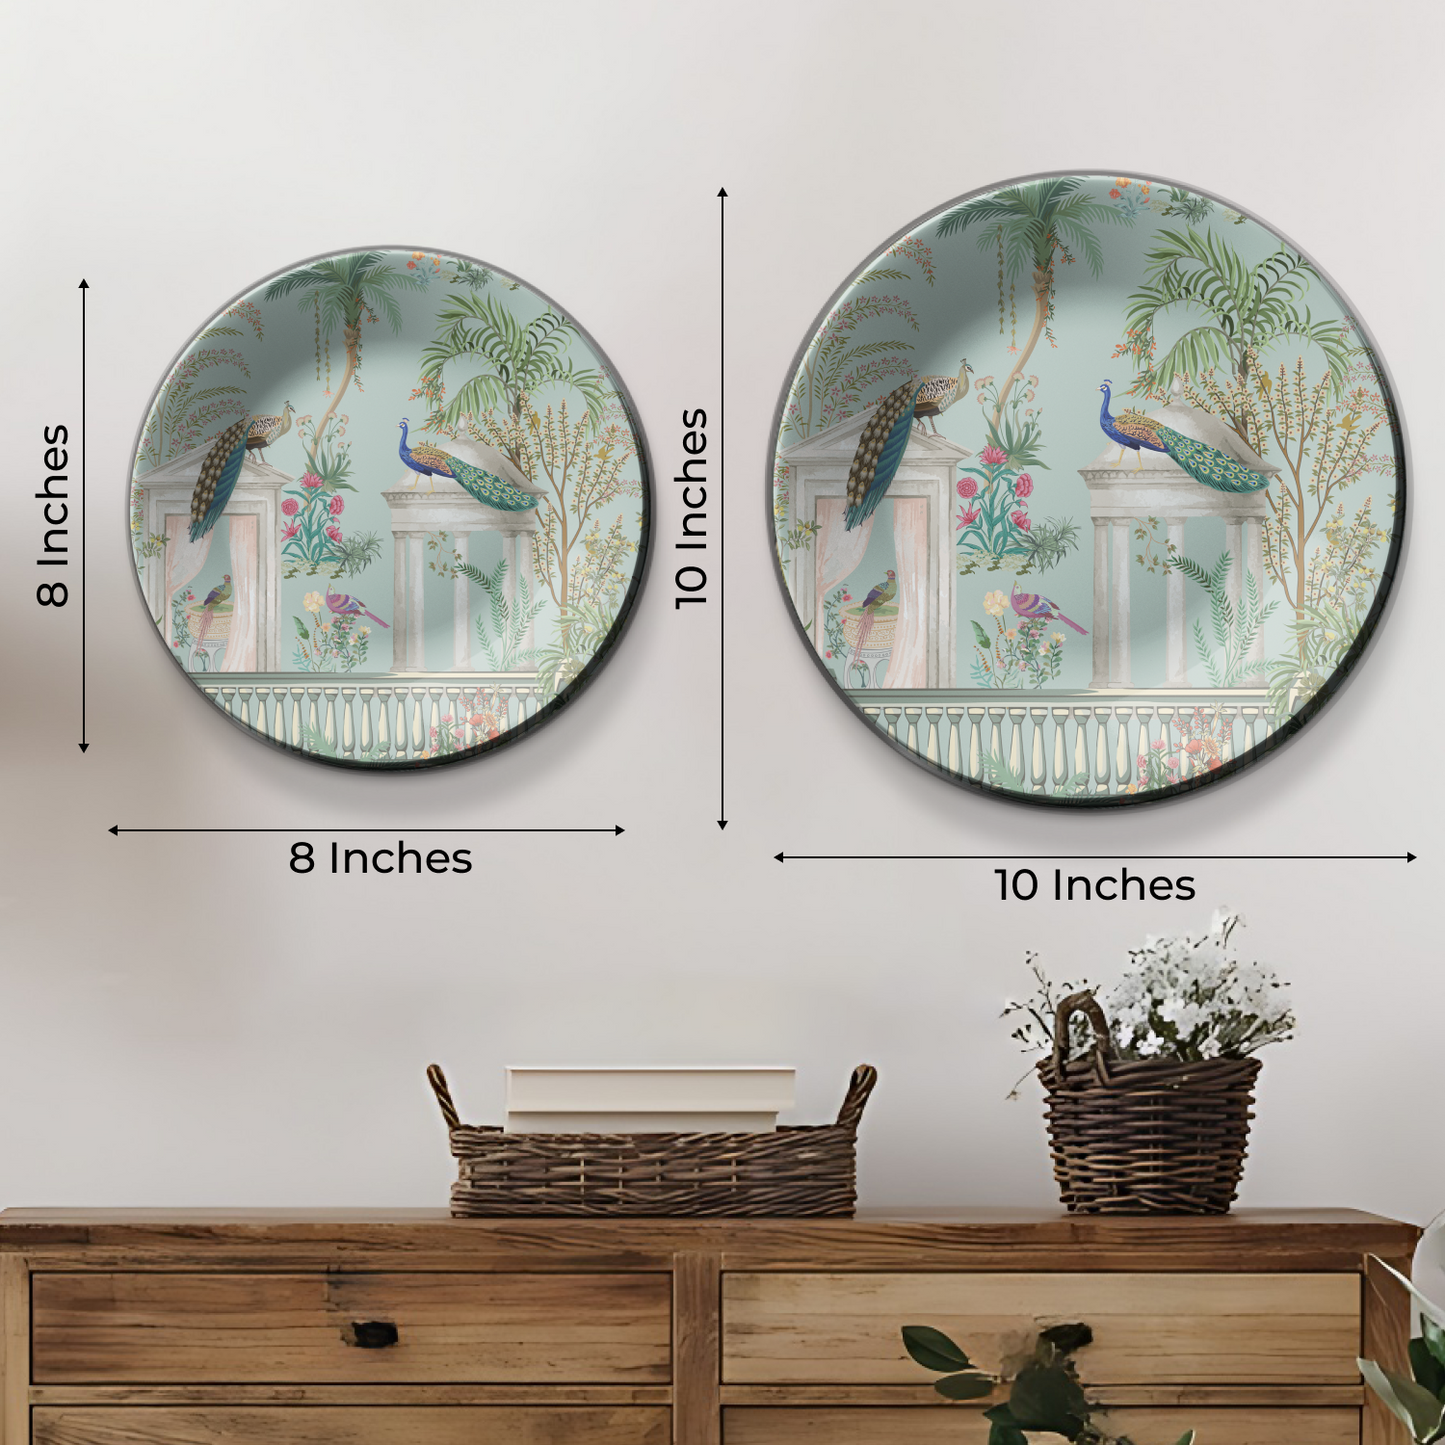 Unique ceramic hanging wall plate  capturing the beauty of peacocks